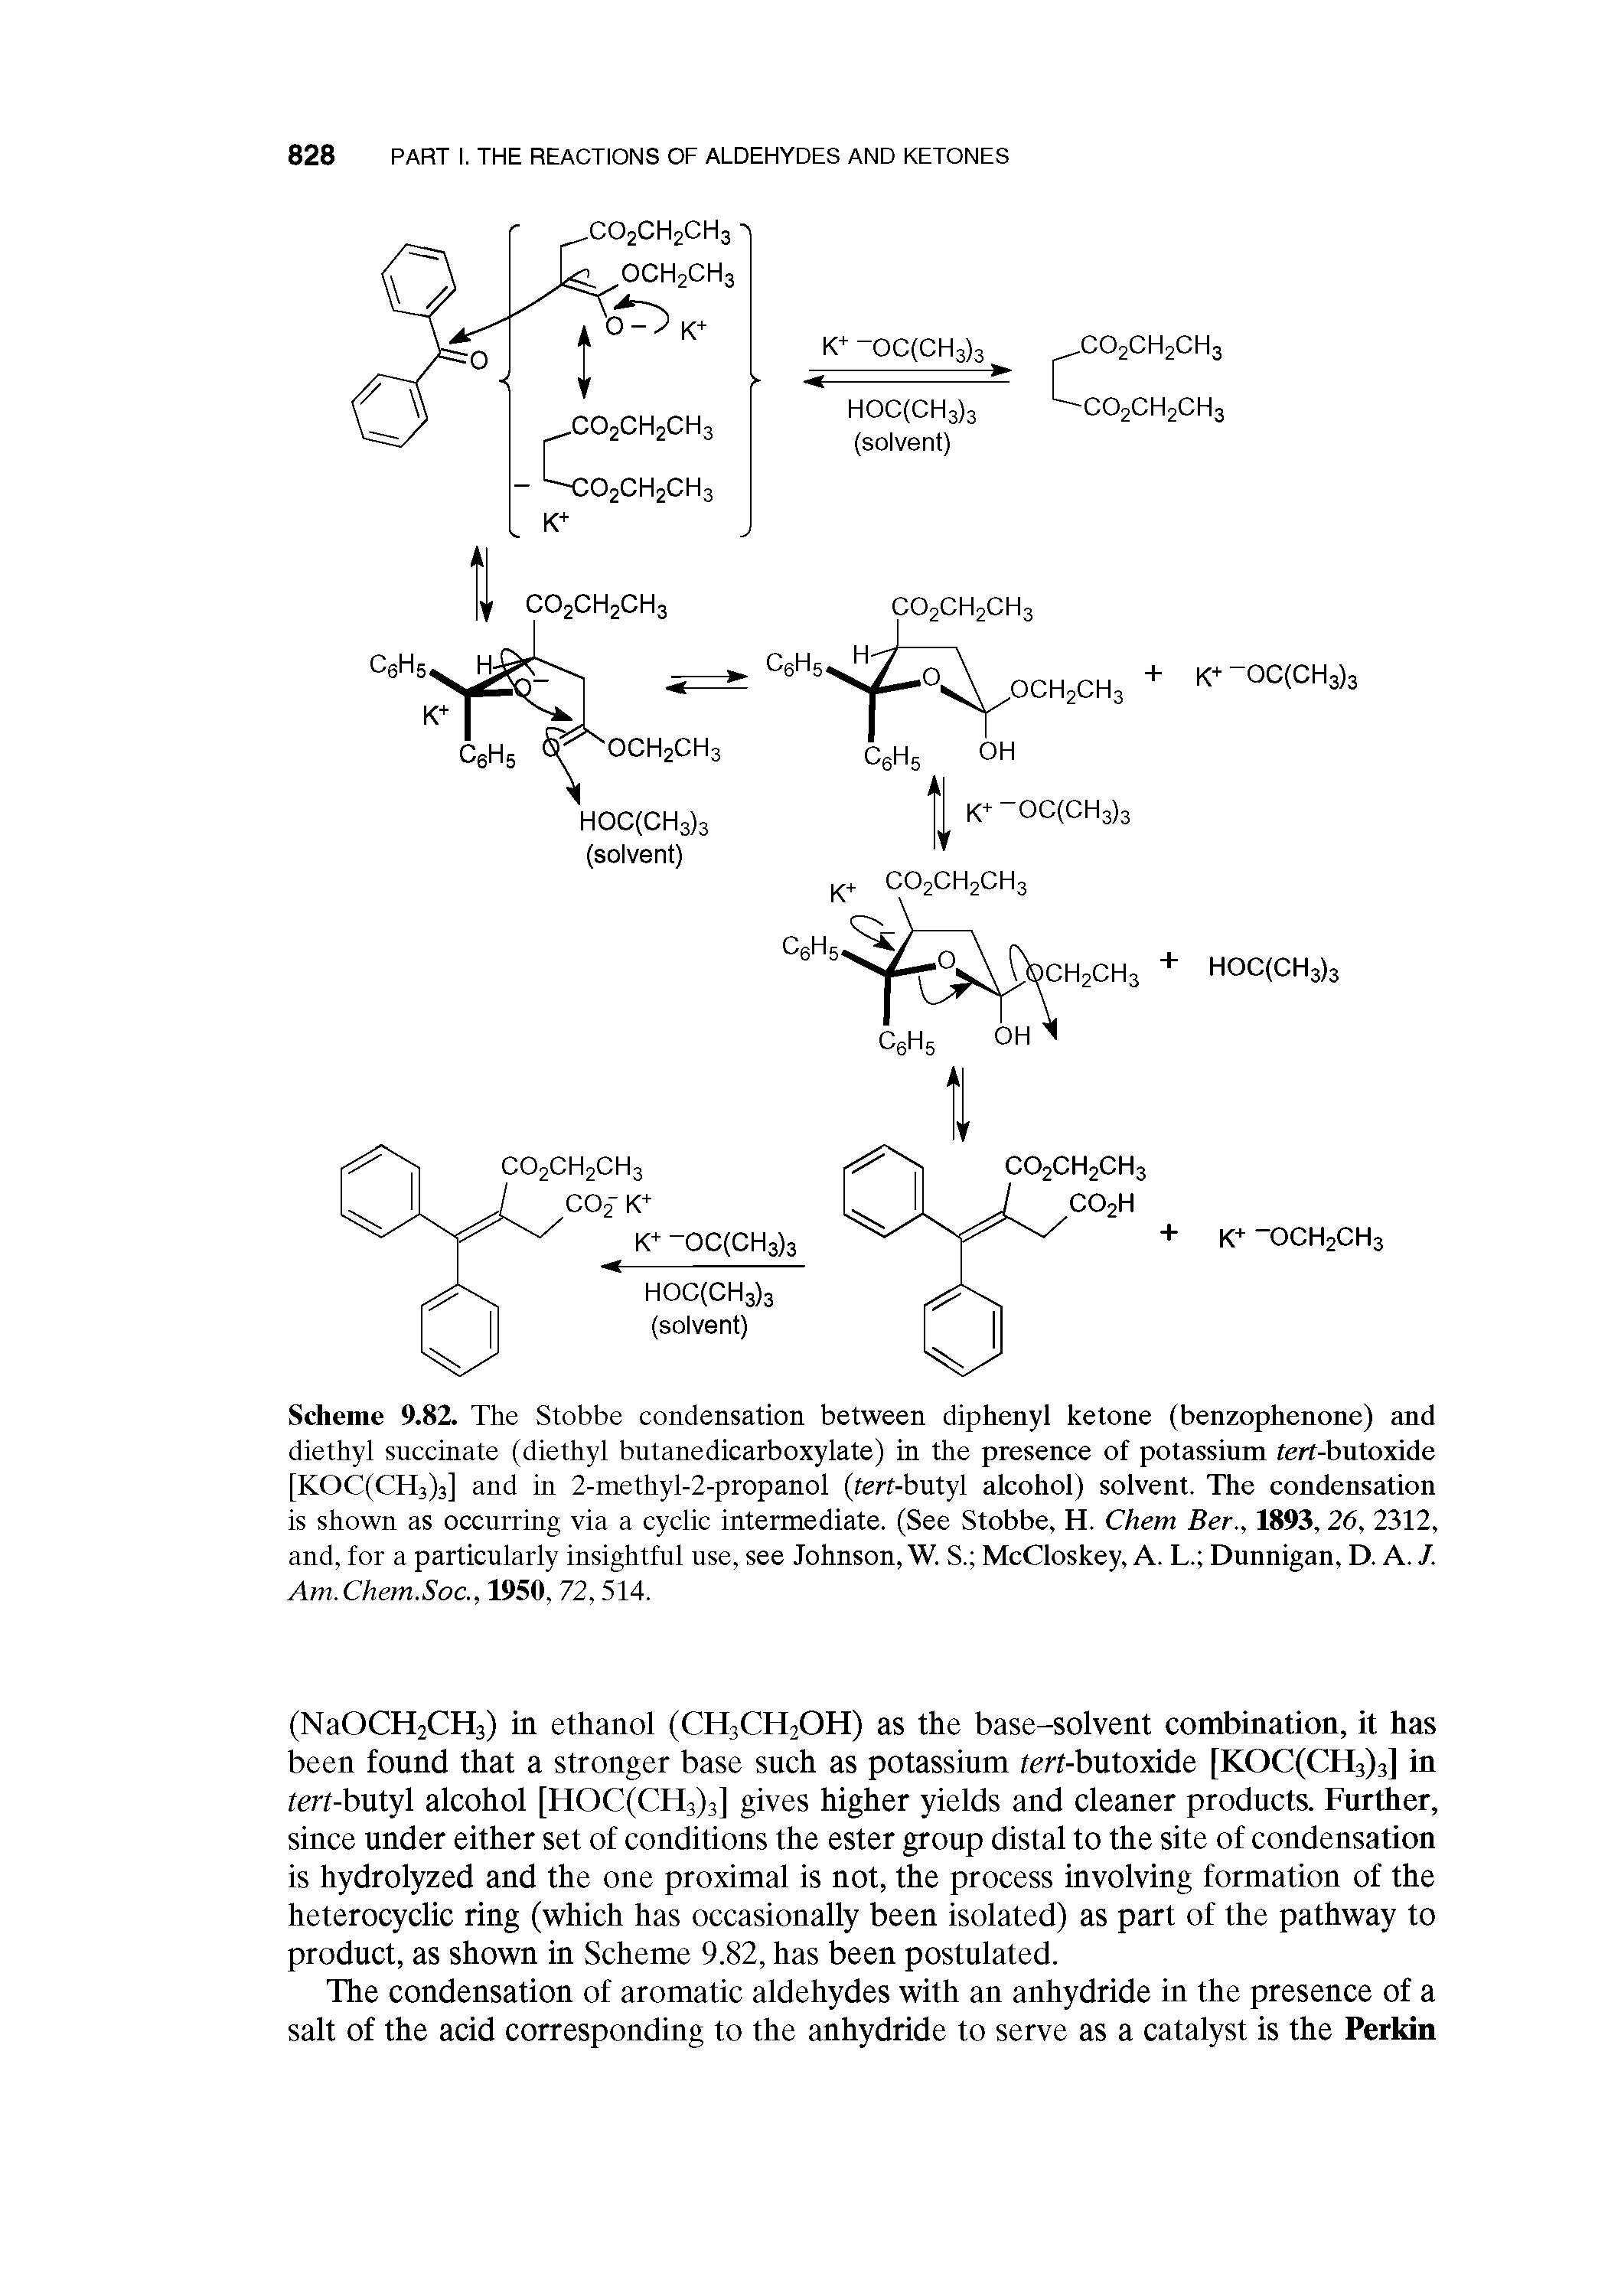 Scheme 9.82. The Stobbe condensation between diphenyl ketone (benzophenone) and diethyl succinate (diethyl butanedicarboxylate) in the presence of potassium ferf-butoxide [K0C(CH3)3] and in 2-methyl-2-propanoi (fert-butyl alcohol) solvent. The condensation is shown as occurring via a cyclic intermediate. (See Stobbe, H. Chem Ber., 1893,26, 2312, and, for a particularly insightful use, see Johnson, W. S. McCloskey, A. L. Dunnigan, D. A. J. Am.Chem.Soc., 1950, 72,514.